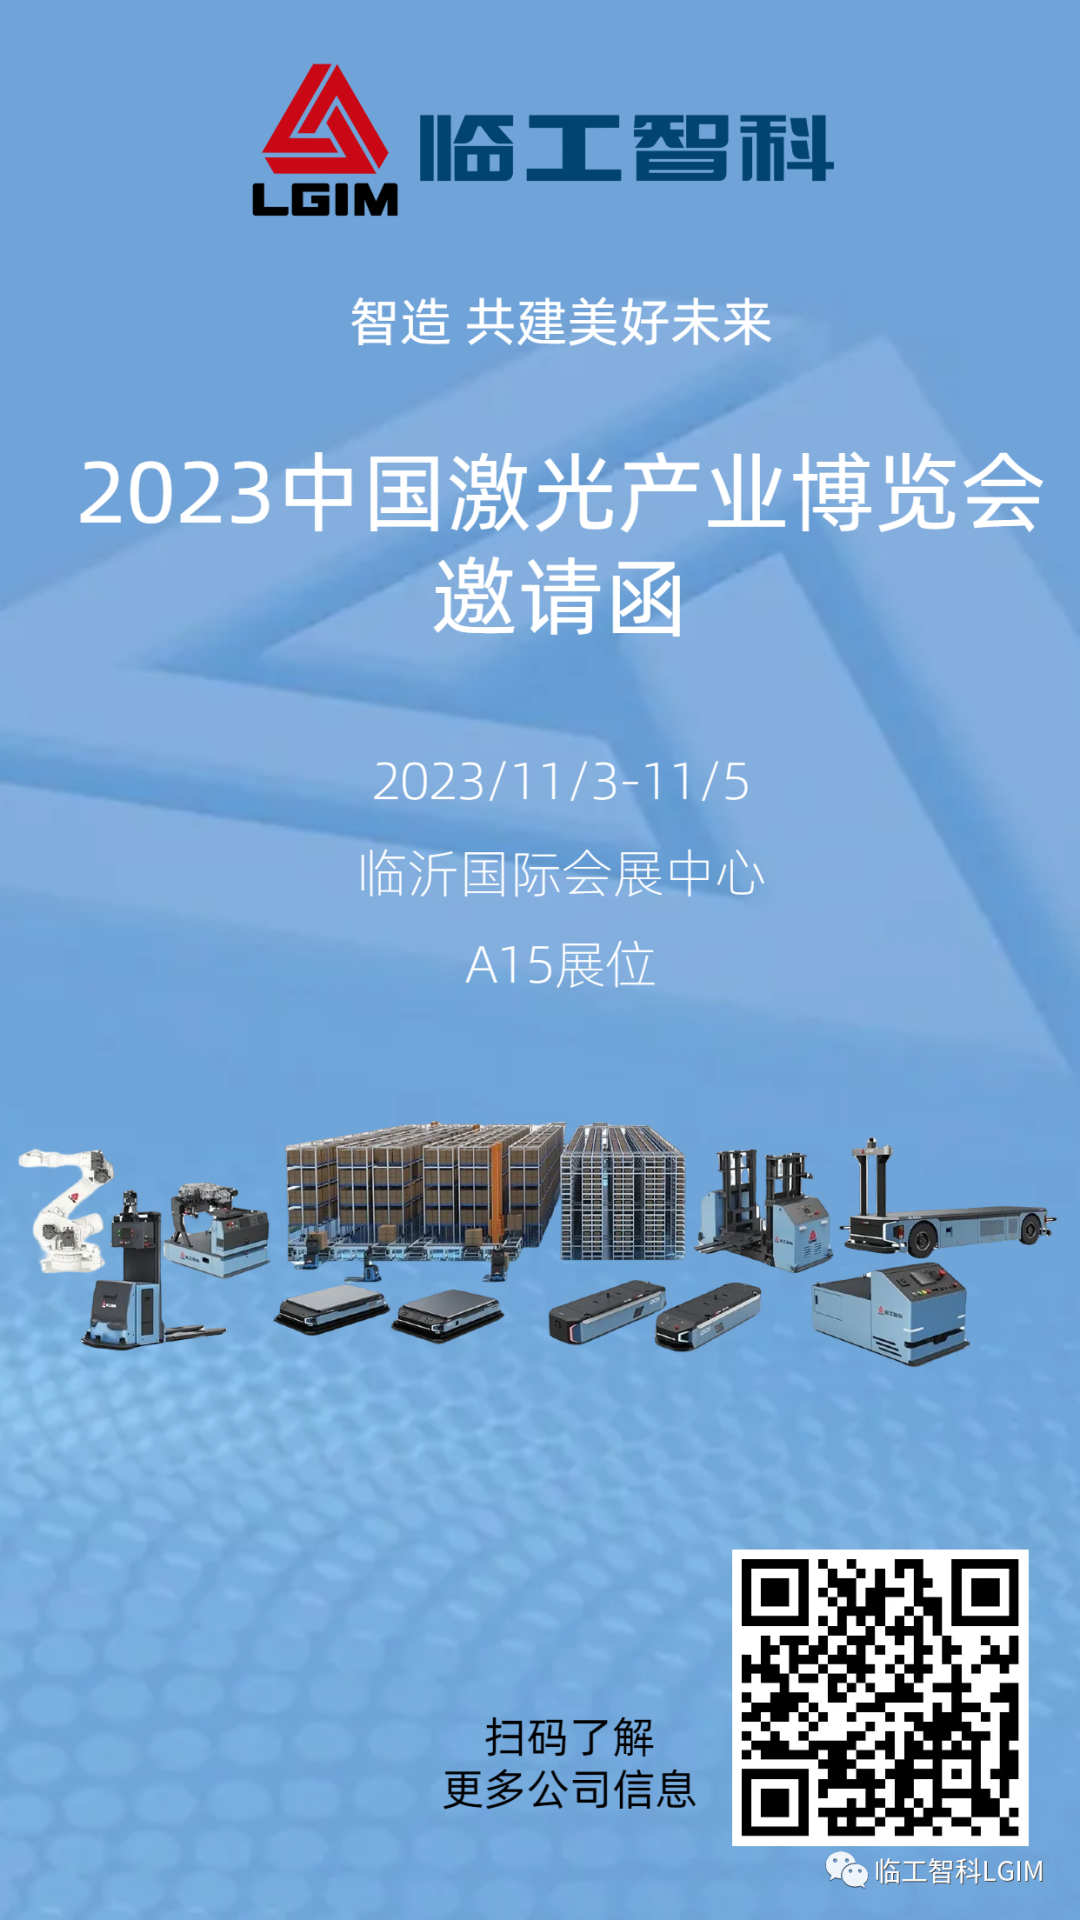 2023 China Laser Industry Expo Will Be Launched Soon, Lingong Zhike Was Invited to Attend